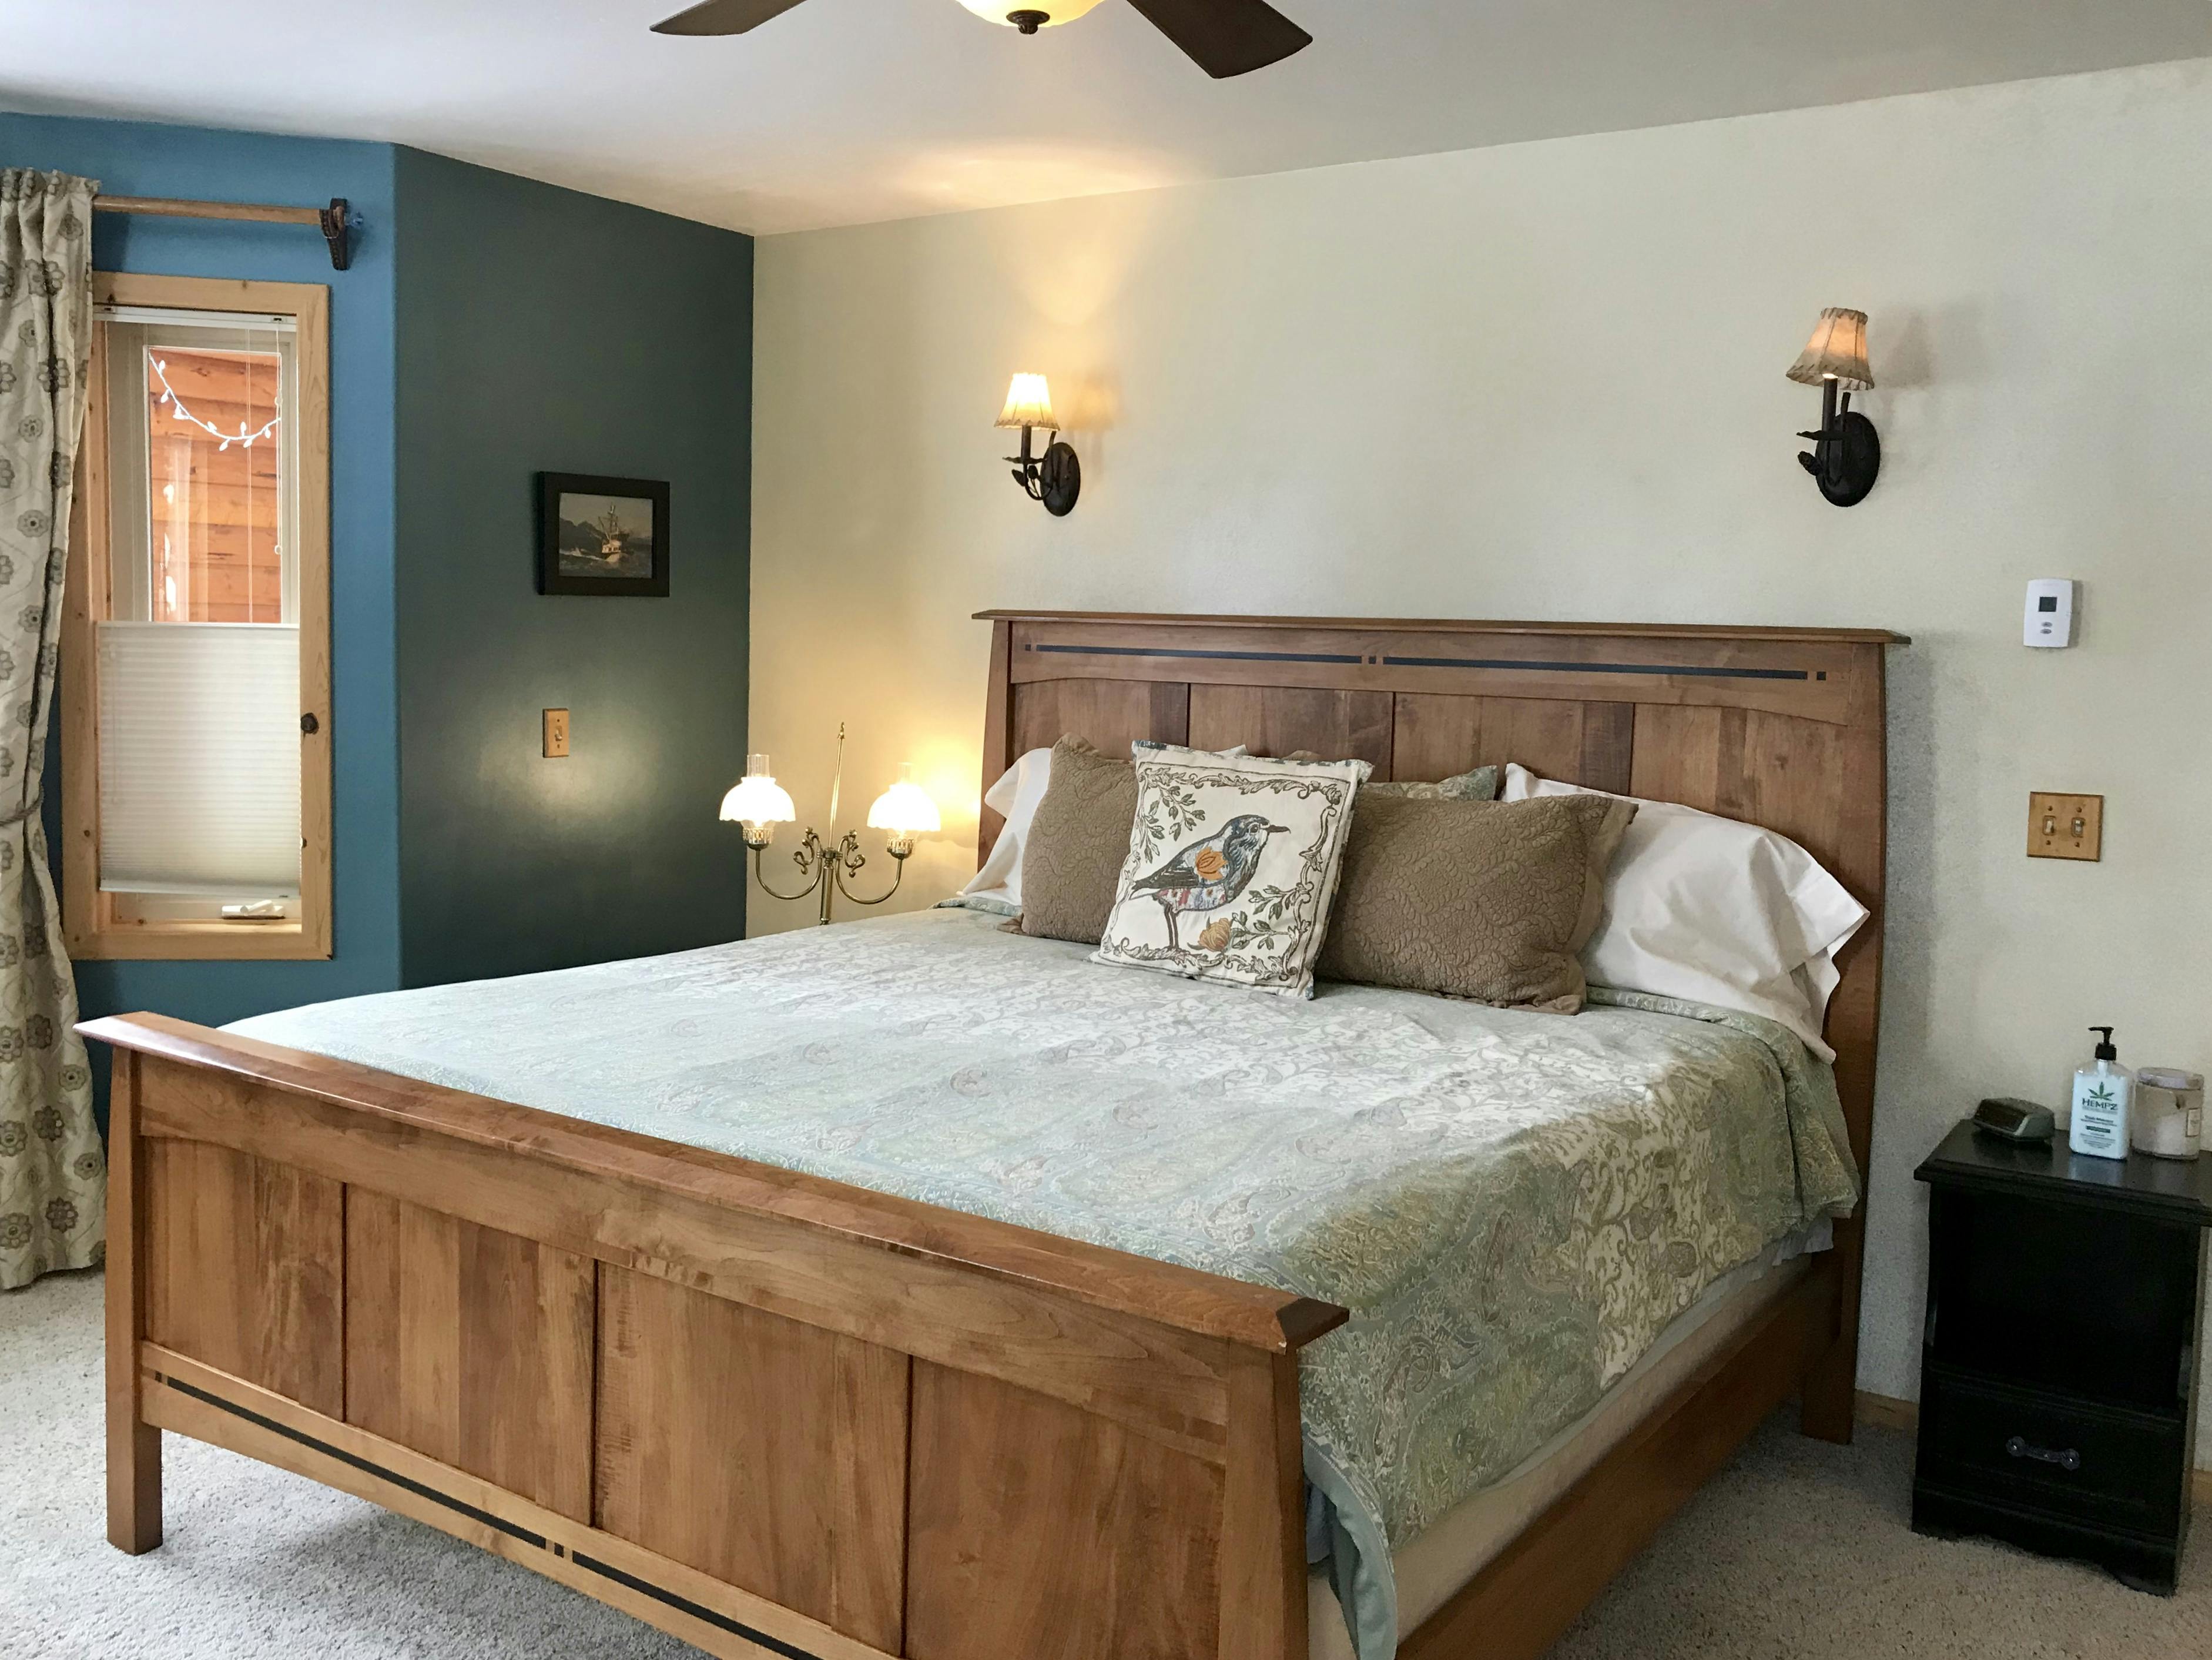 Cozy bed with wooden headboard and footboard, decorative throw pillows, nightstand, and ceiling fan